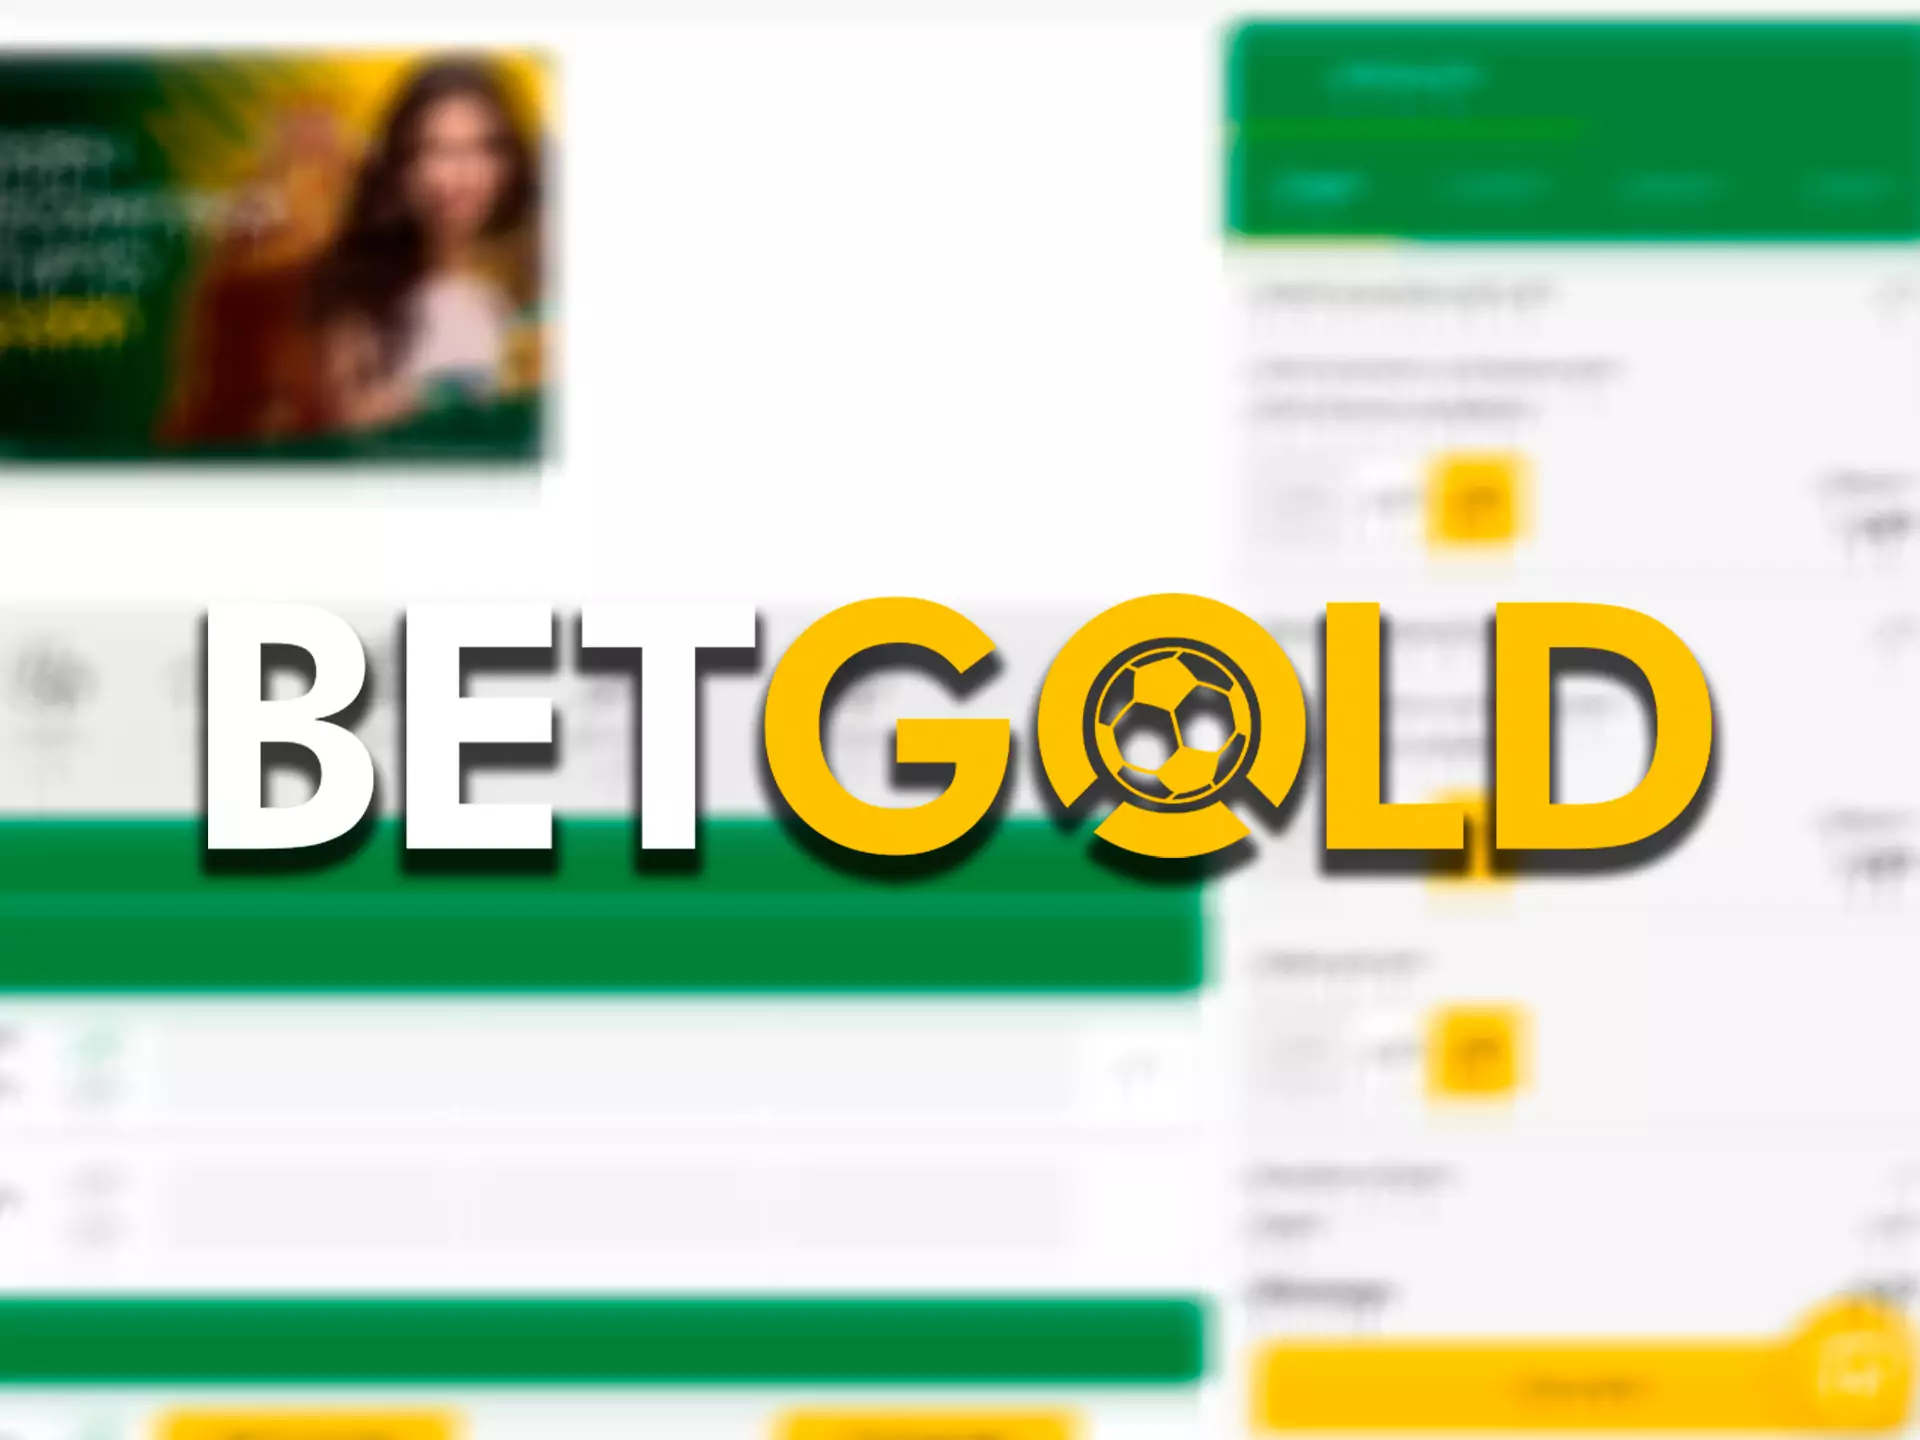 Betgold is a good cricket betting platform for Indian players.